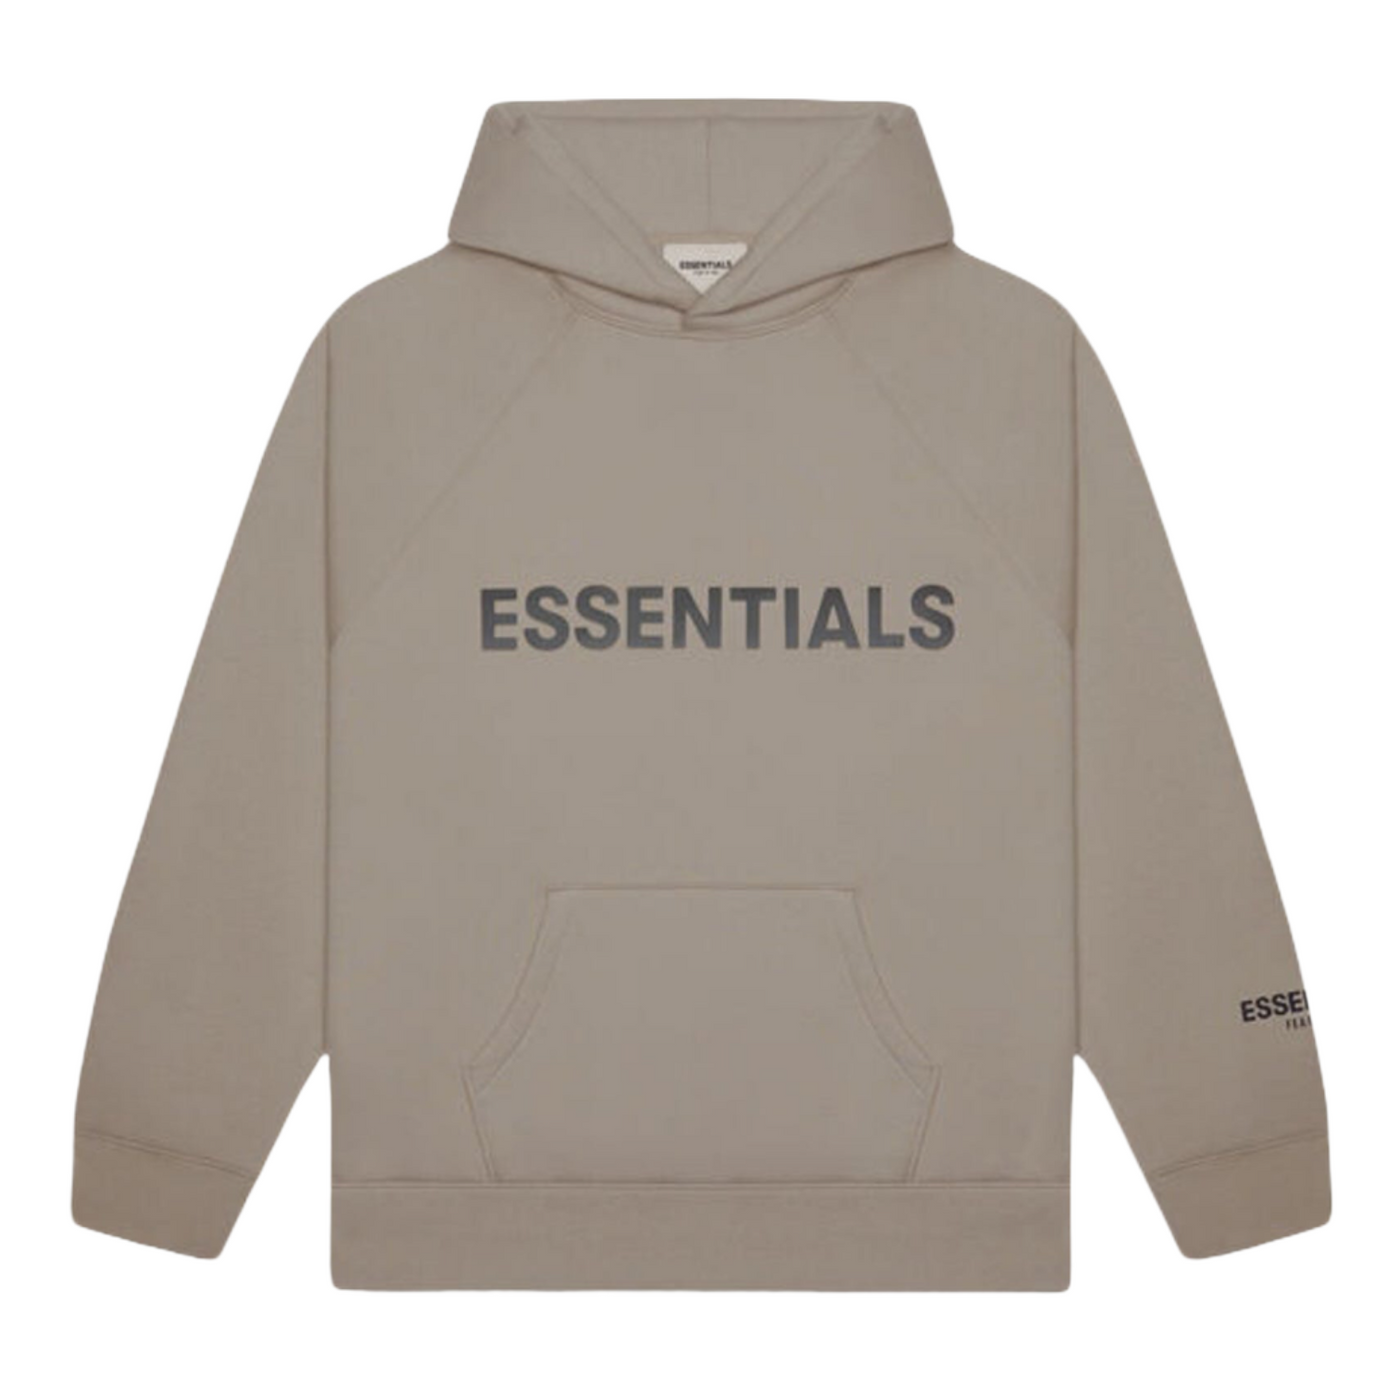 FEAR OF GOD ESSENTIALS TAUPE HOODIE